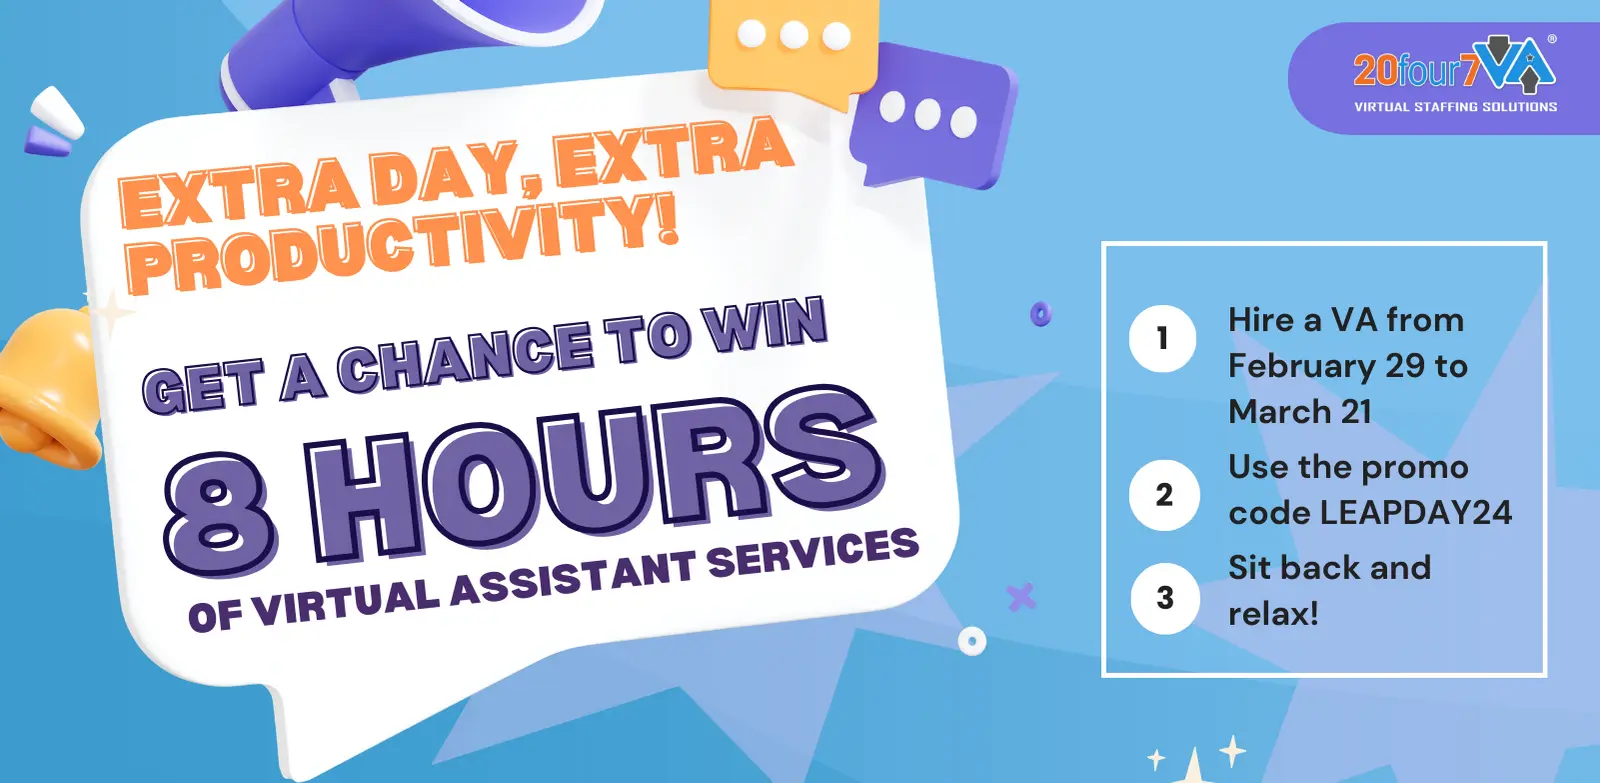 Leap Day 2024 Promo Win 8 FREE Virtual Assistant hours! 20four7VA